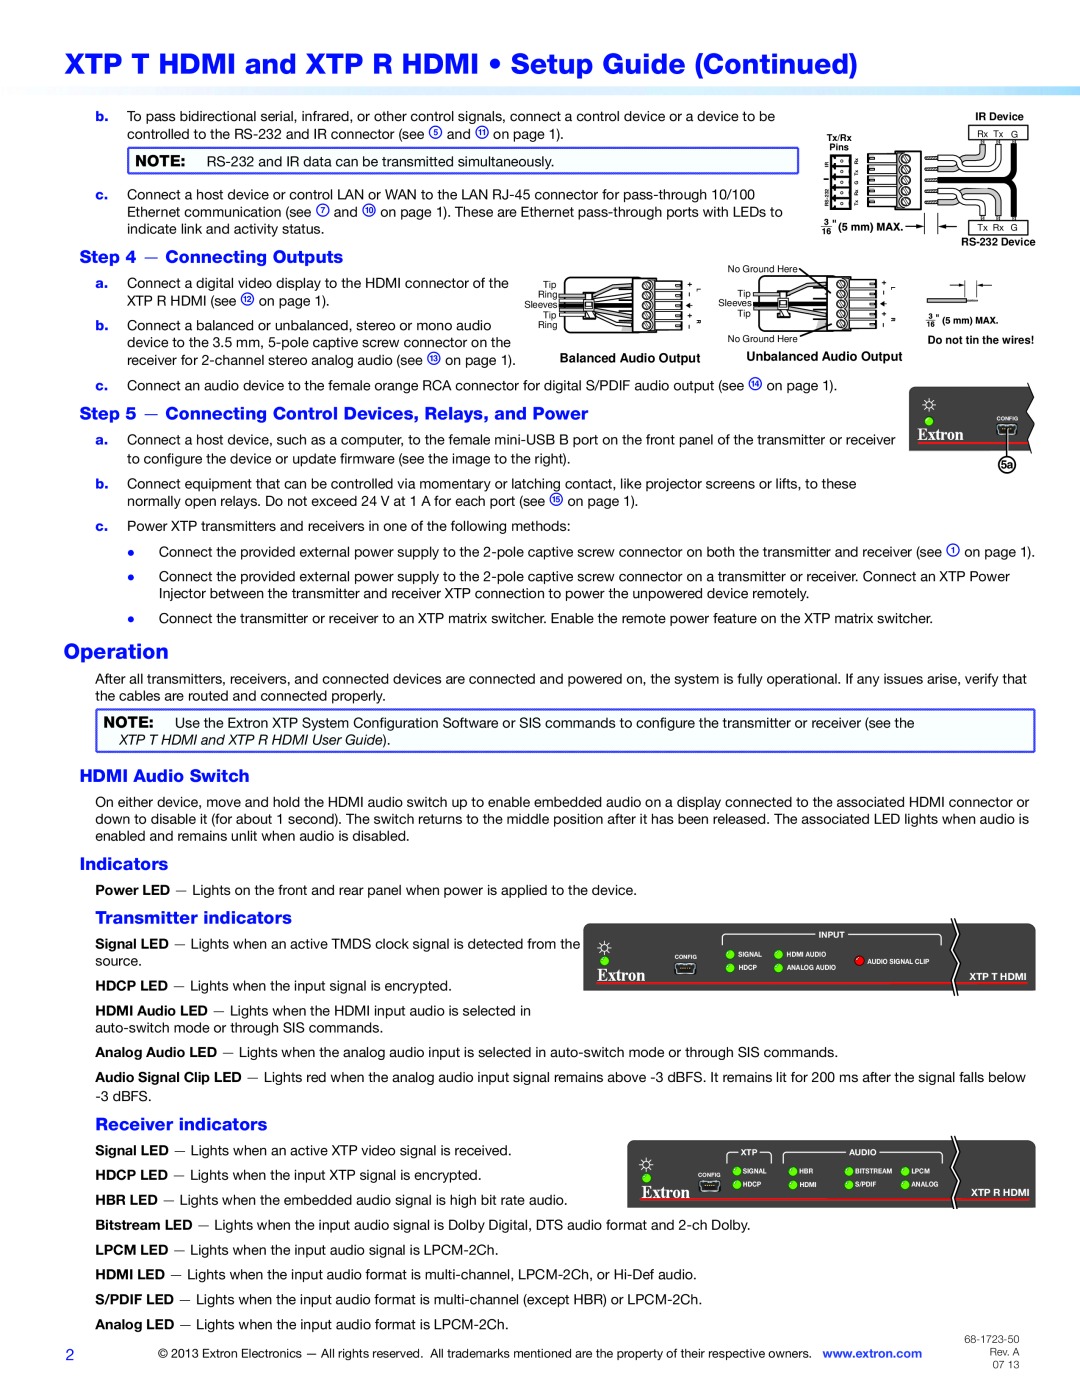 Extron electronic 60-1043-12 XTP T HDMI and XTP R HDMI Setup Guide Continued, Operation, Connecting Outputs, Indicators 